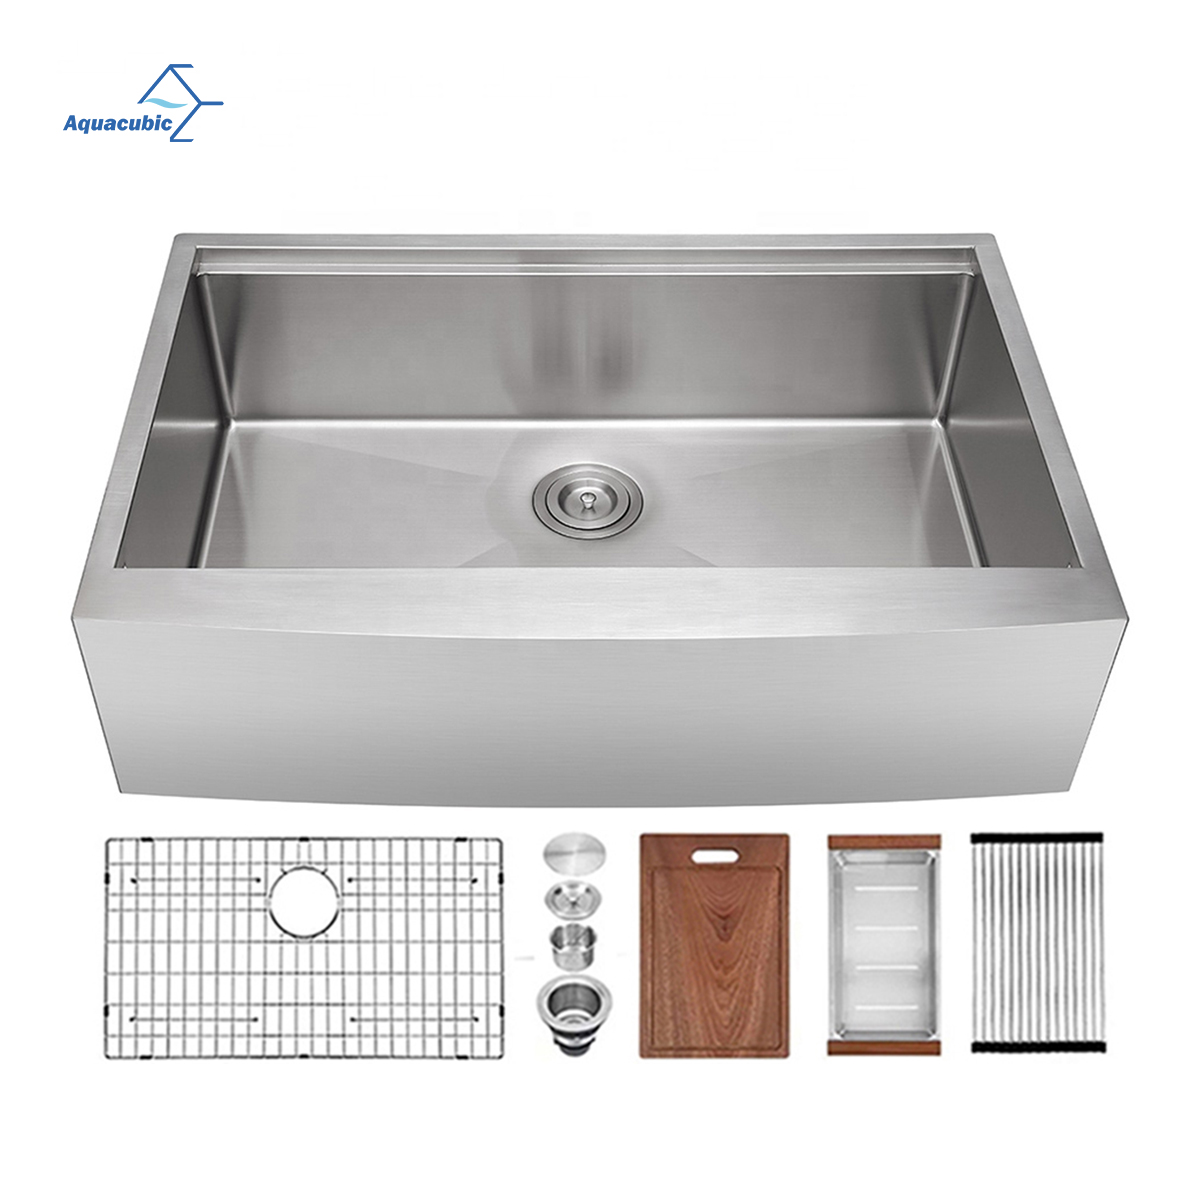 Farmhouse workstation 304 Stainless Steel Handmade Apron Front Kitchen Sink with Ledge